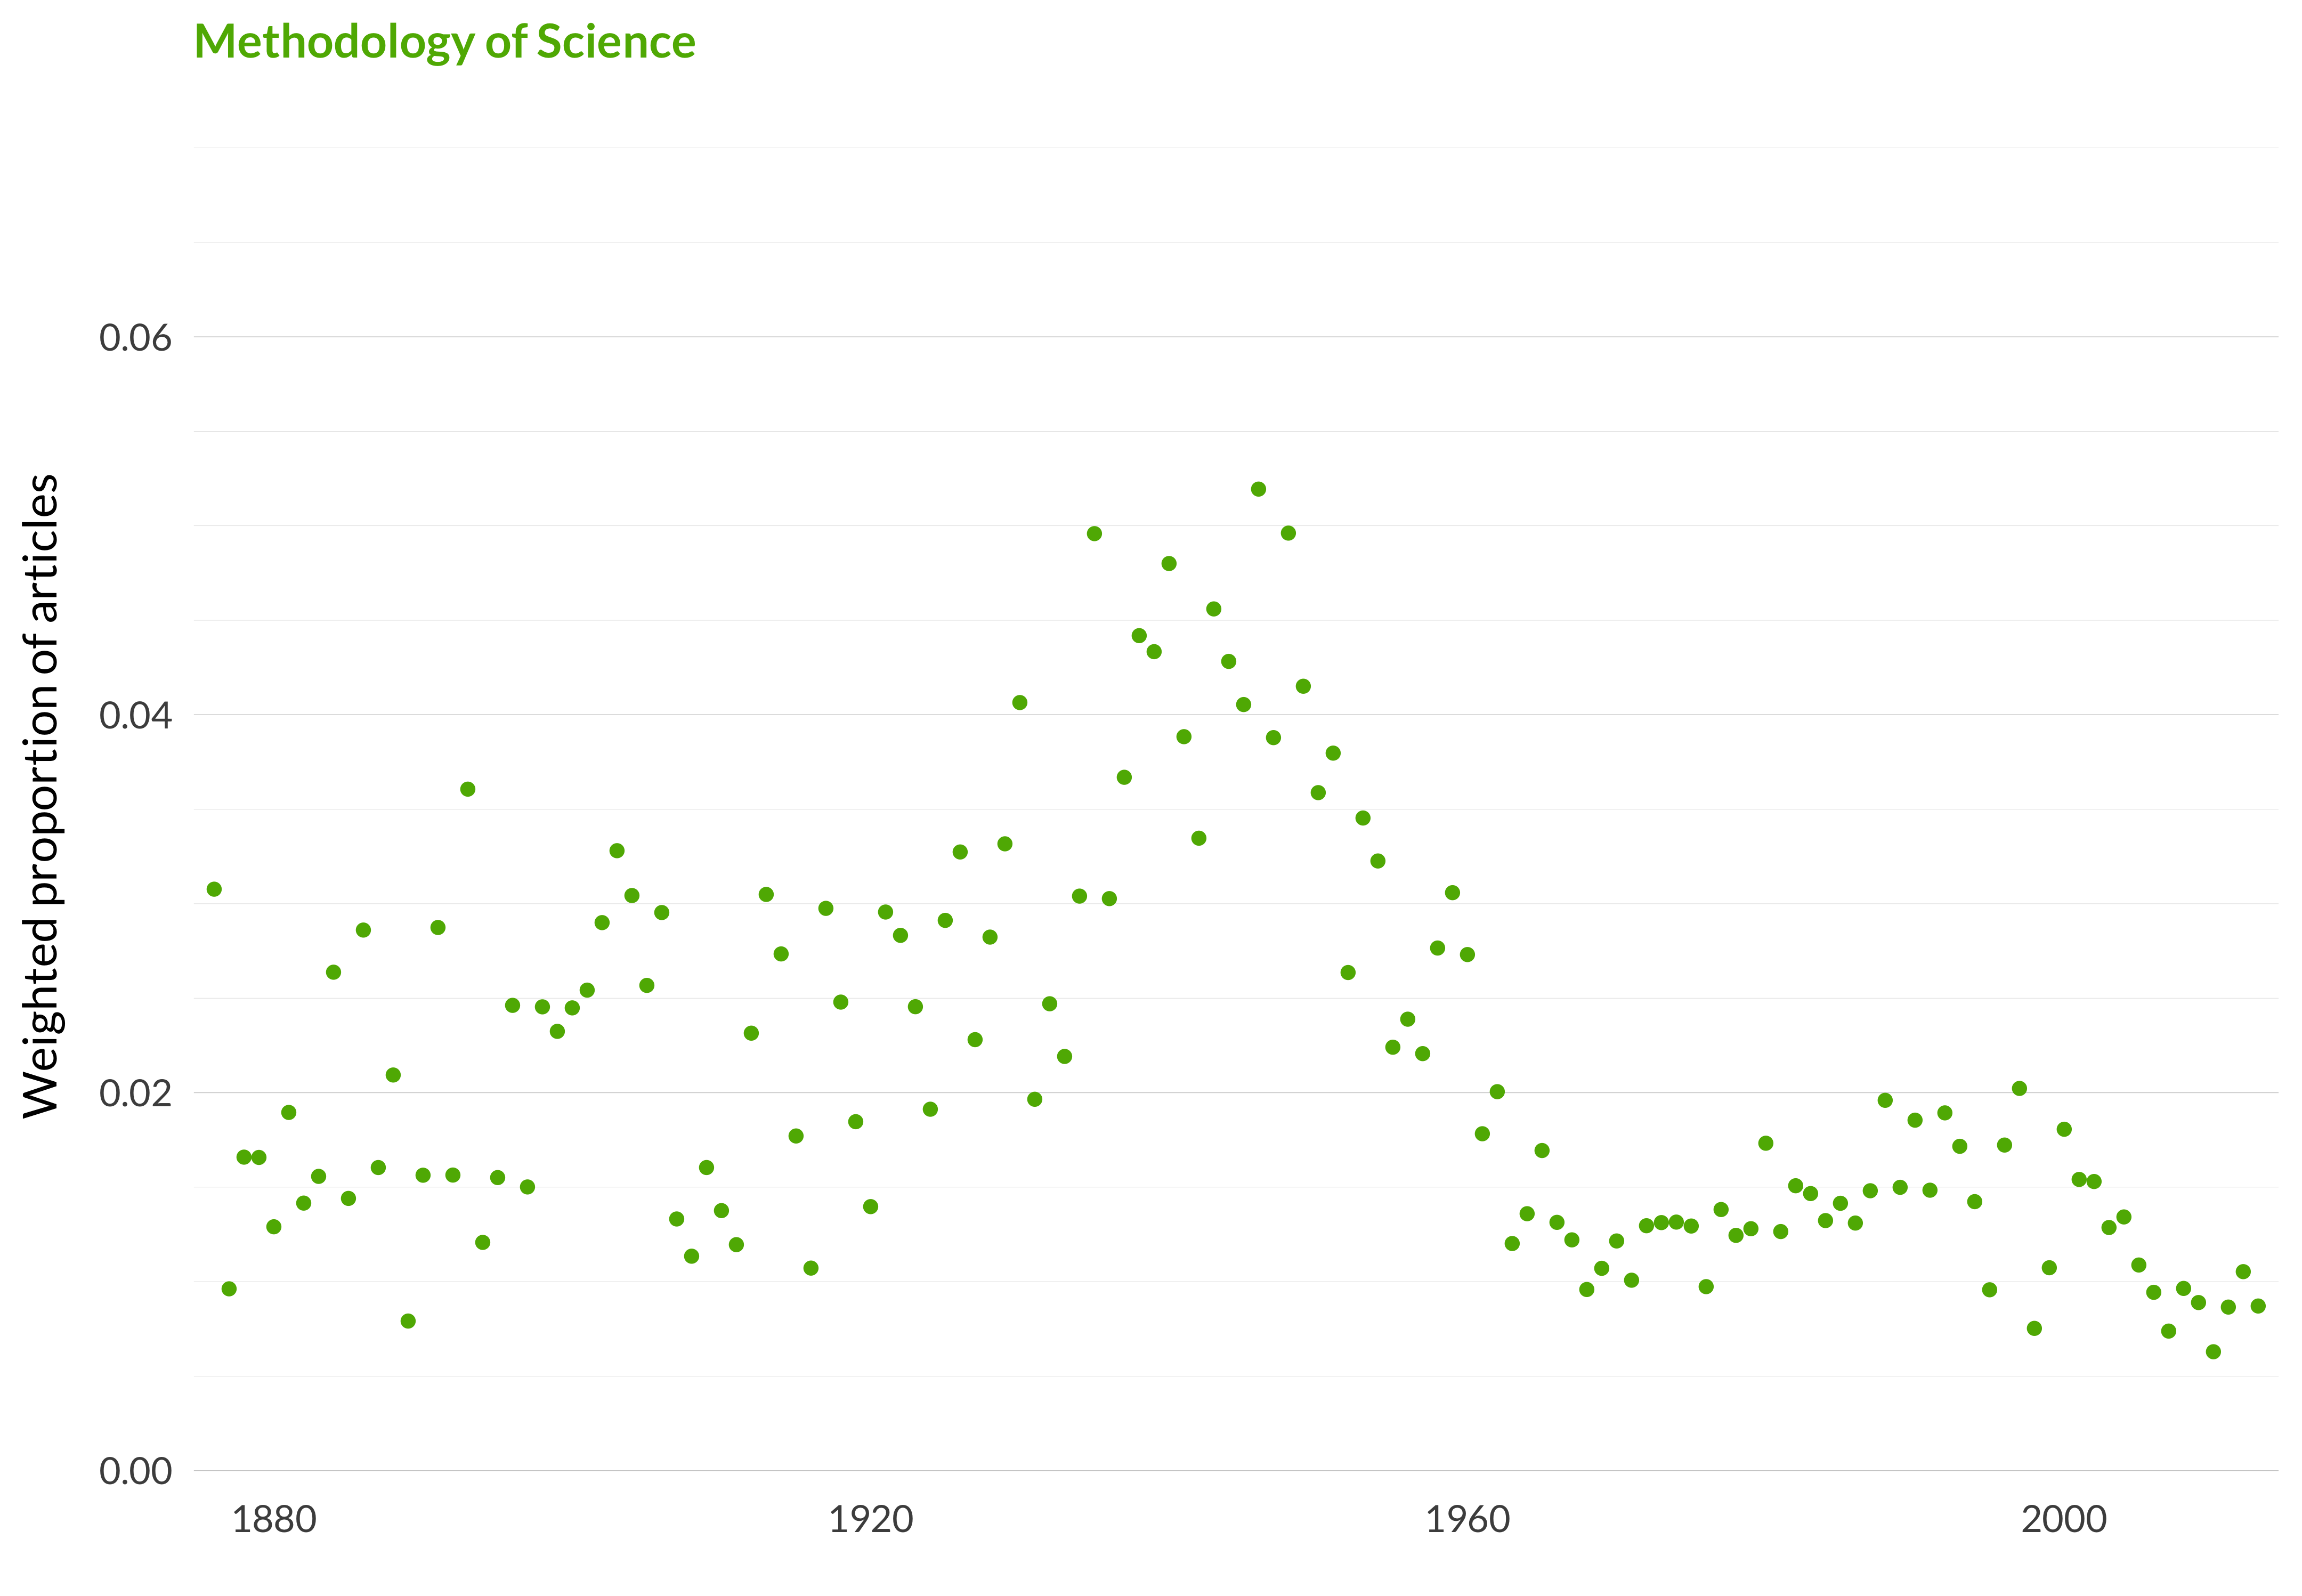 A scatterplot showing which proportion of articles each year are in the methodology of sciencetopic. The x-axis shows the year, the y-axis measures the proportion of articles each year in this topic. There is one dot per year. The highest value is in 1946 when 5.2% of articles were in this topic. The lowest value is in 2010 when 0.6% of articles were in this topic. The full table that provides the data for this graph is available in Table A.26 in Appendix A.